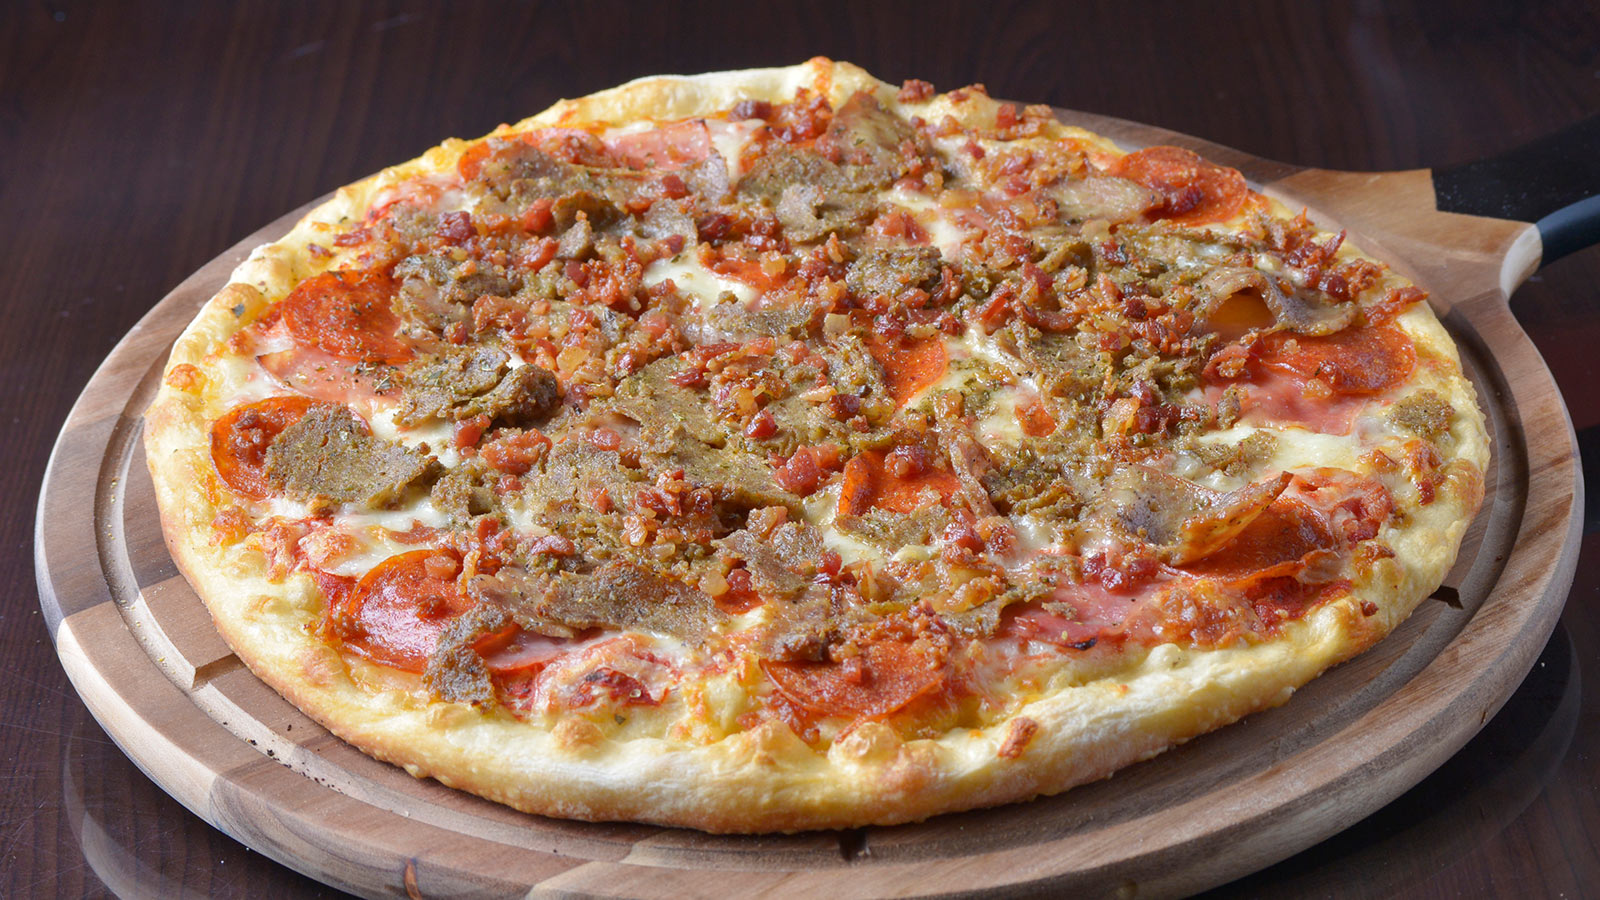 Mikelson's Meat Lovers Pizza